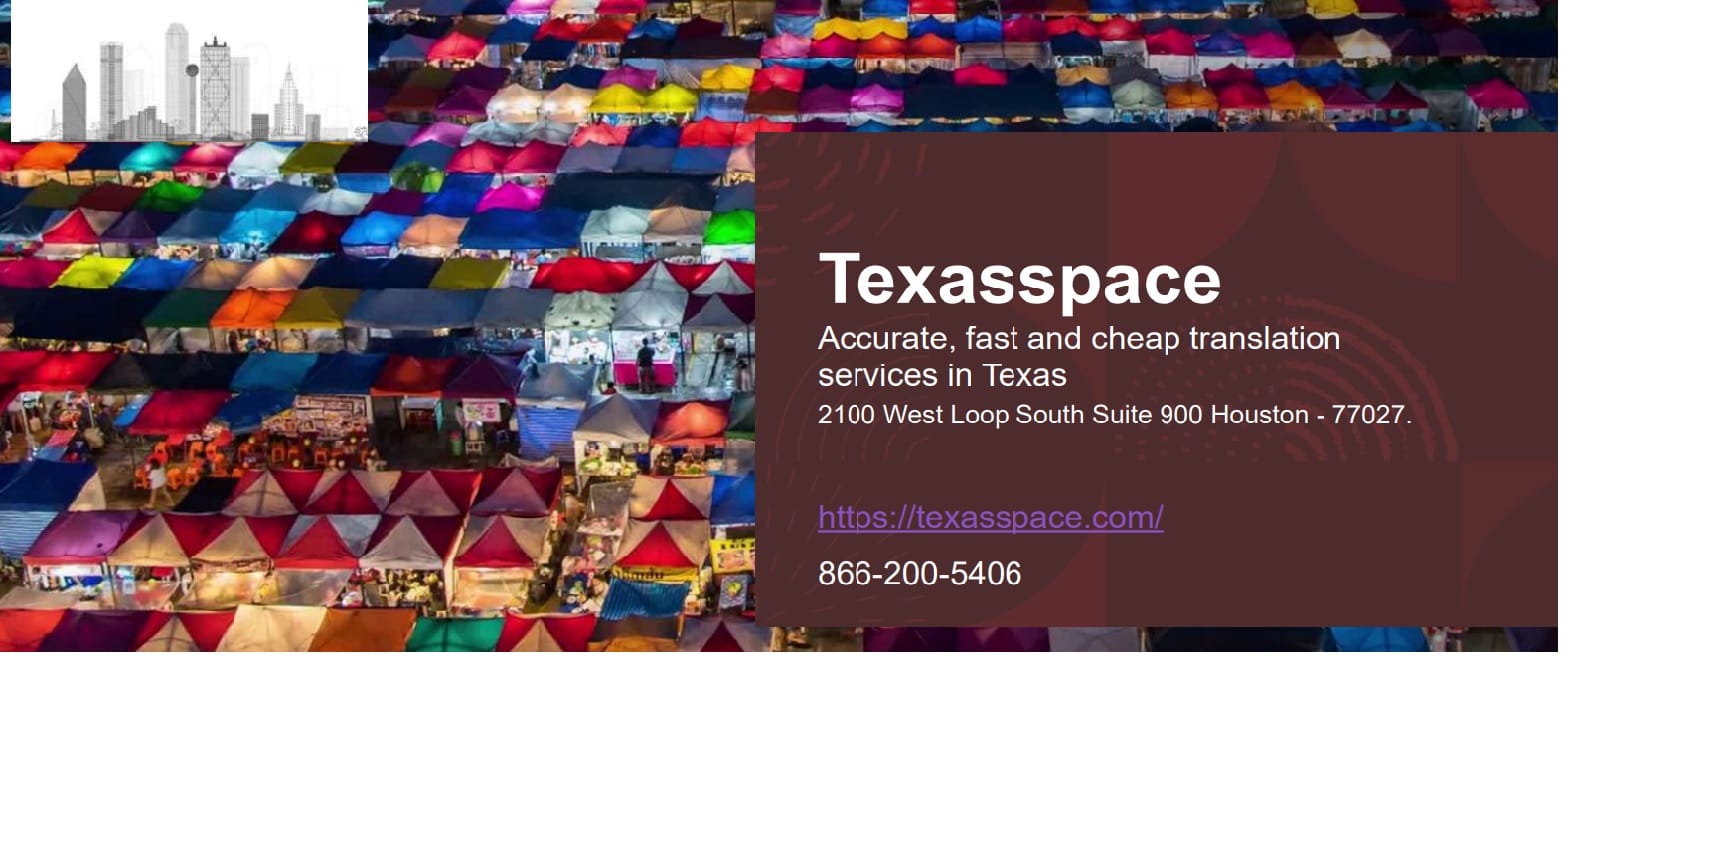 texasspace with add-44577987